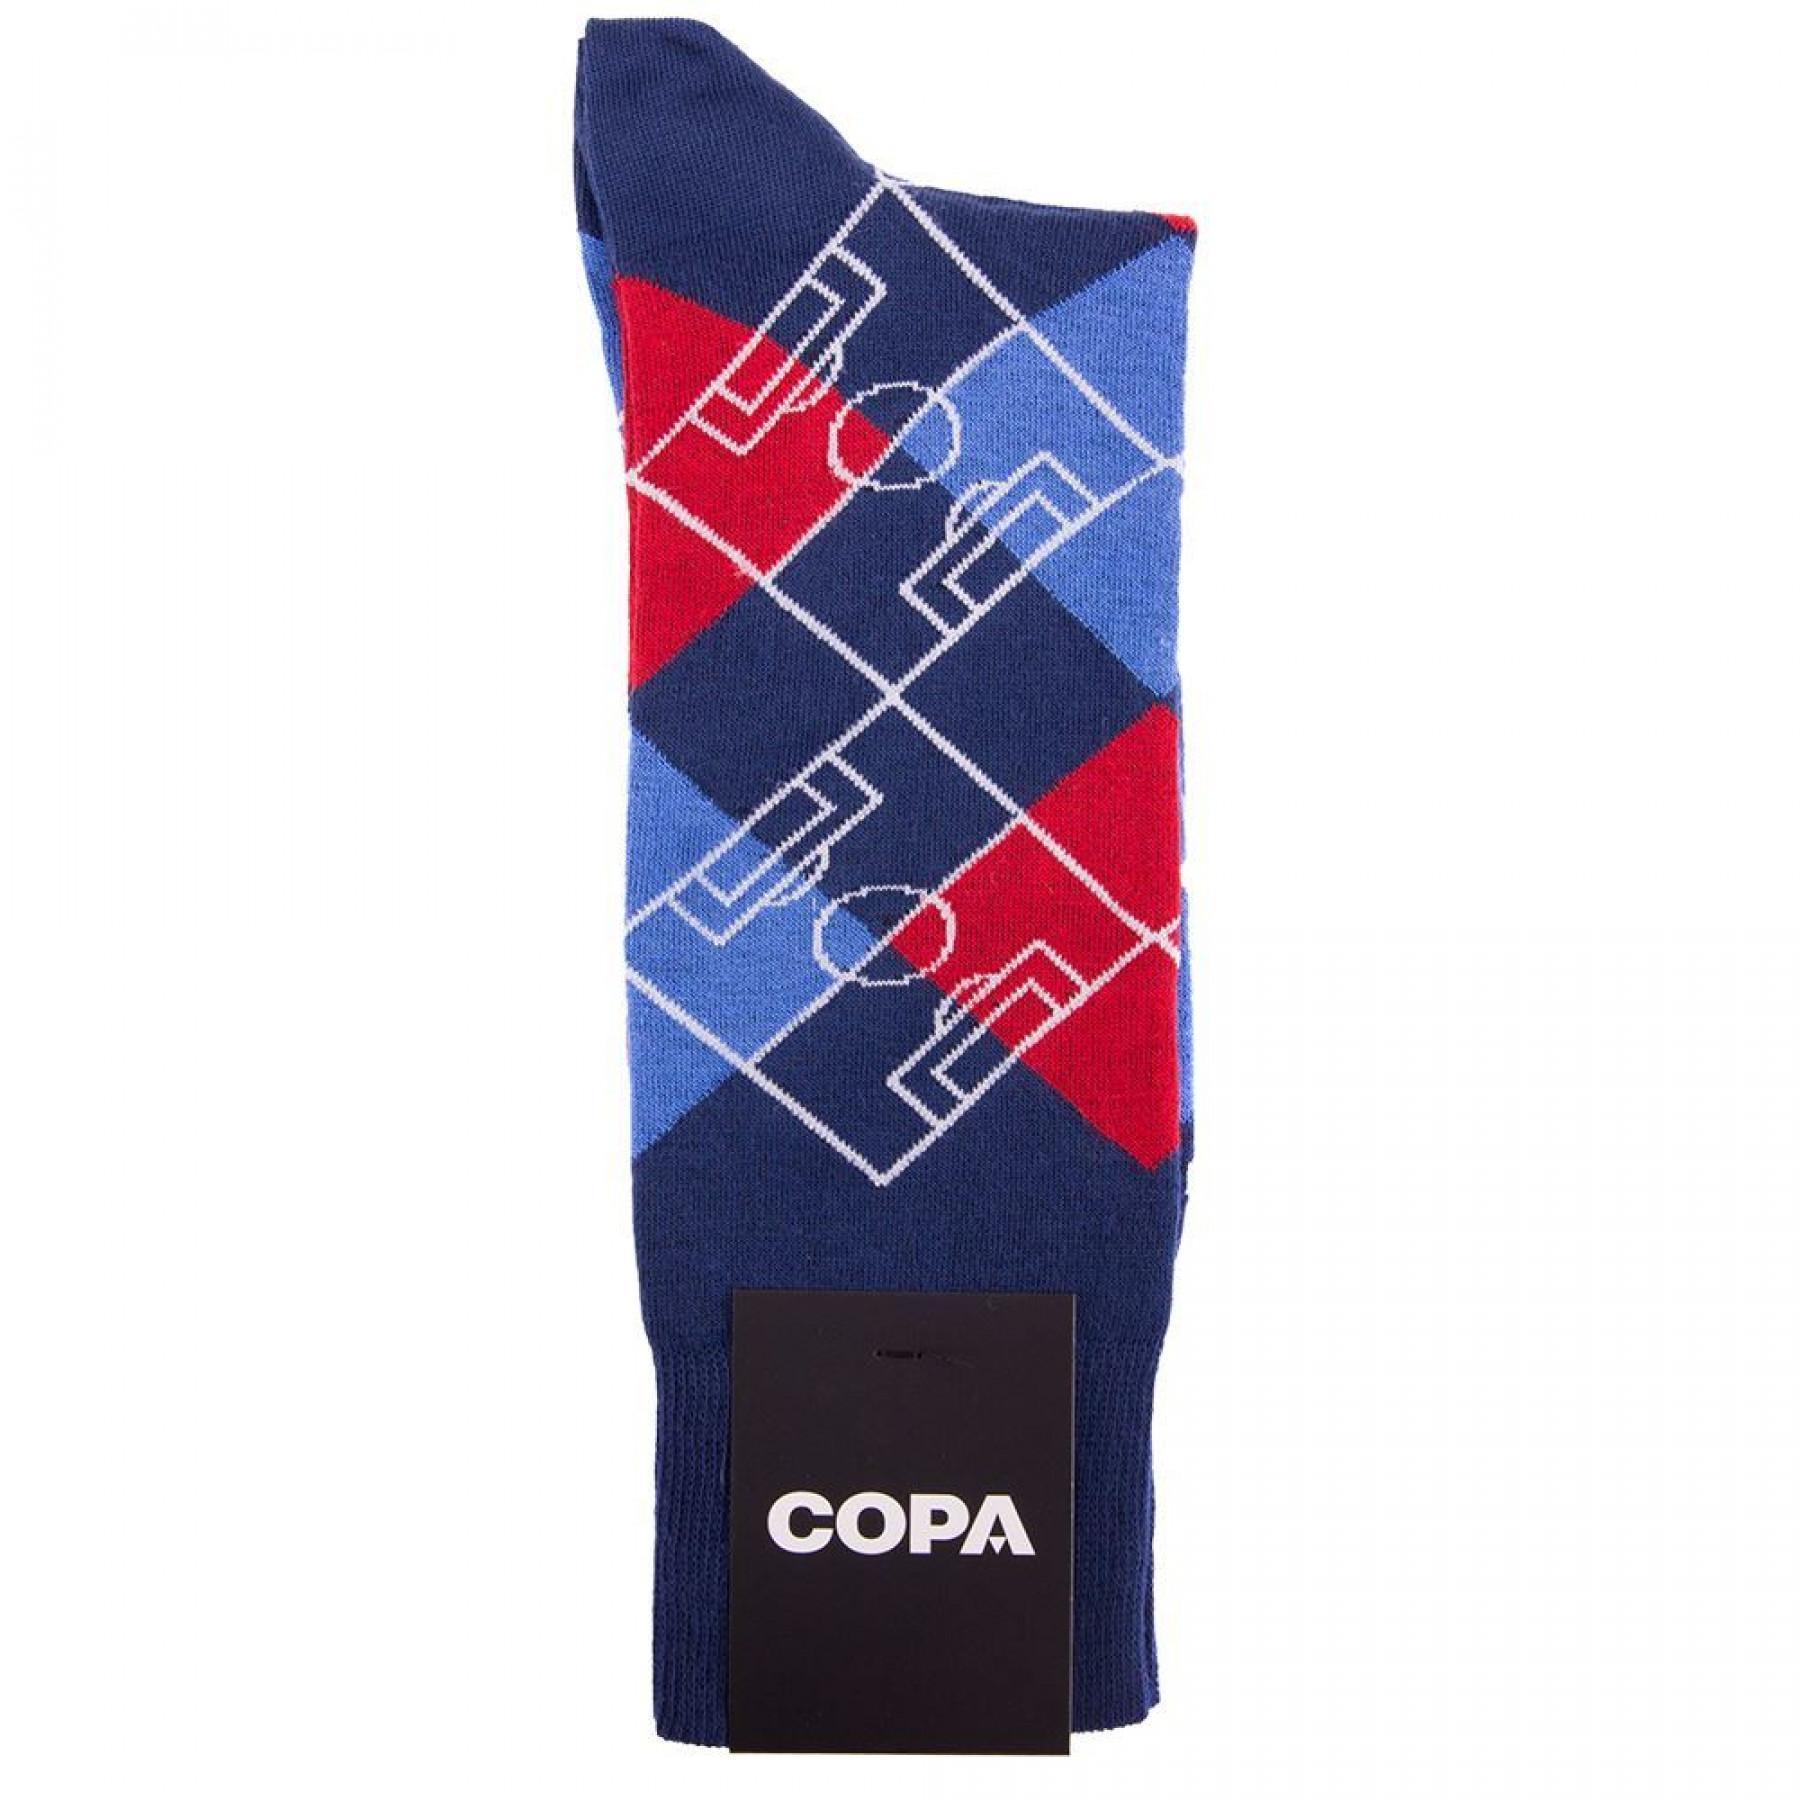 Chaussettes Copa Football Pitch